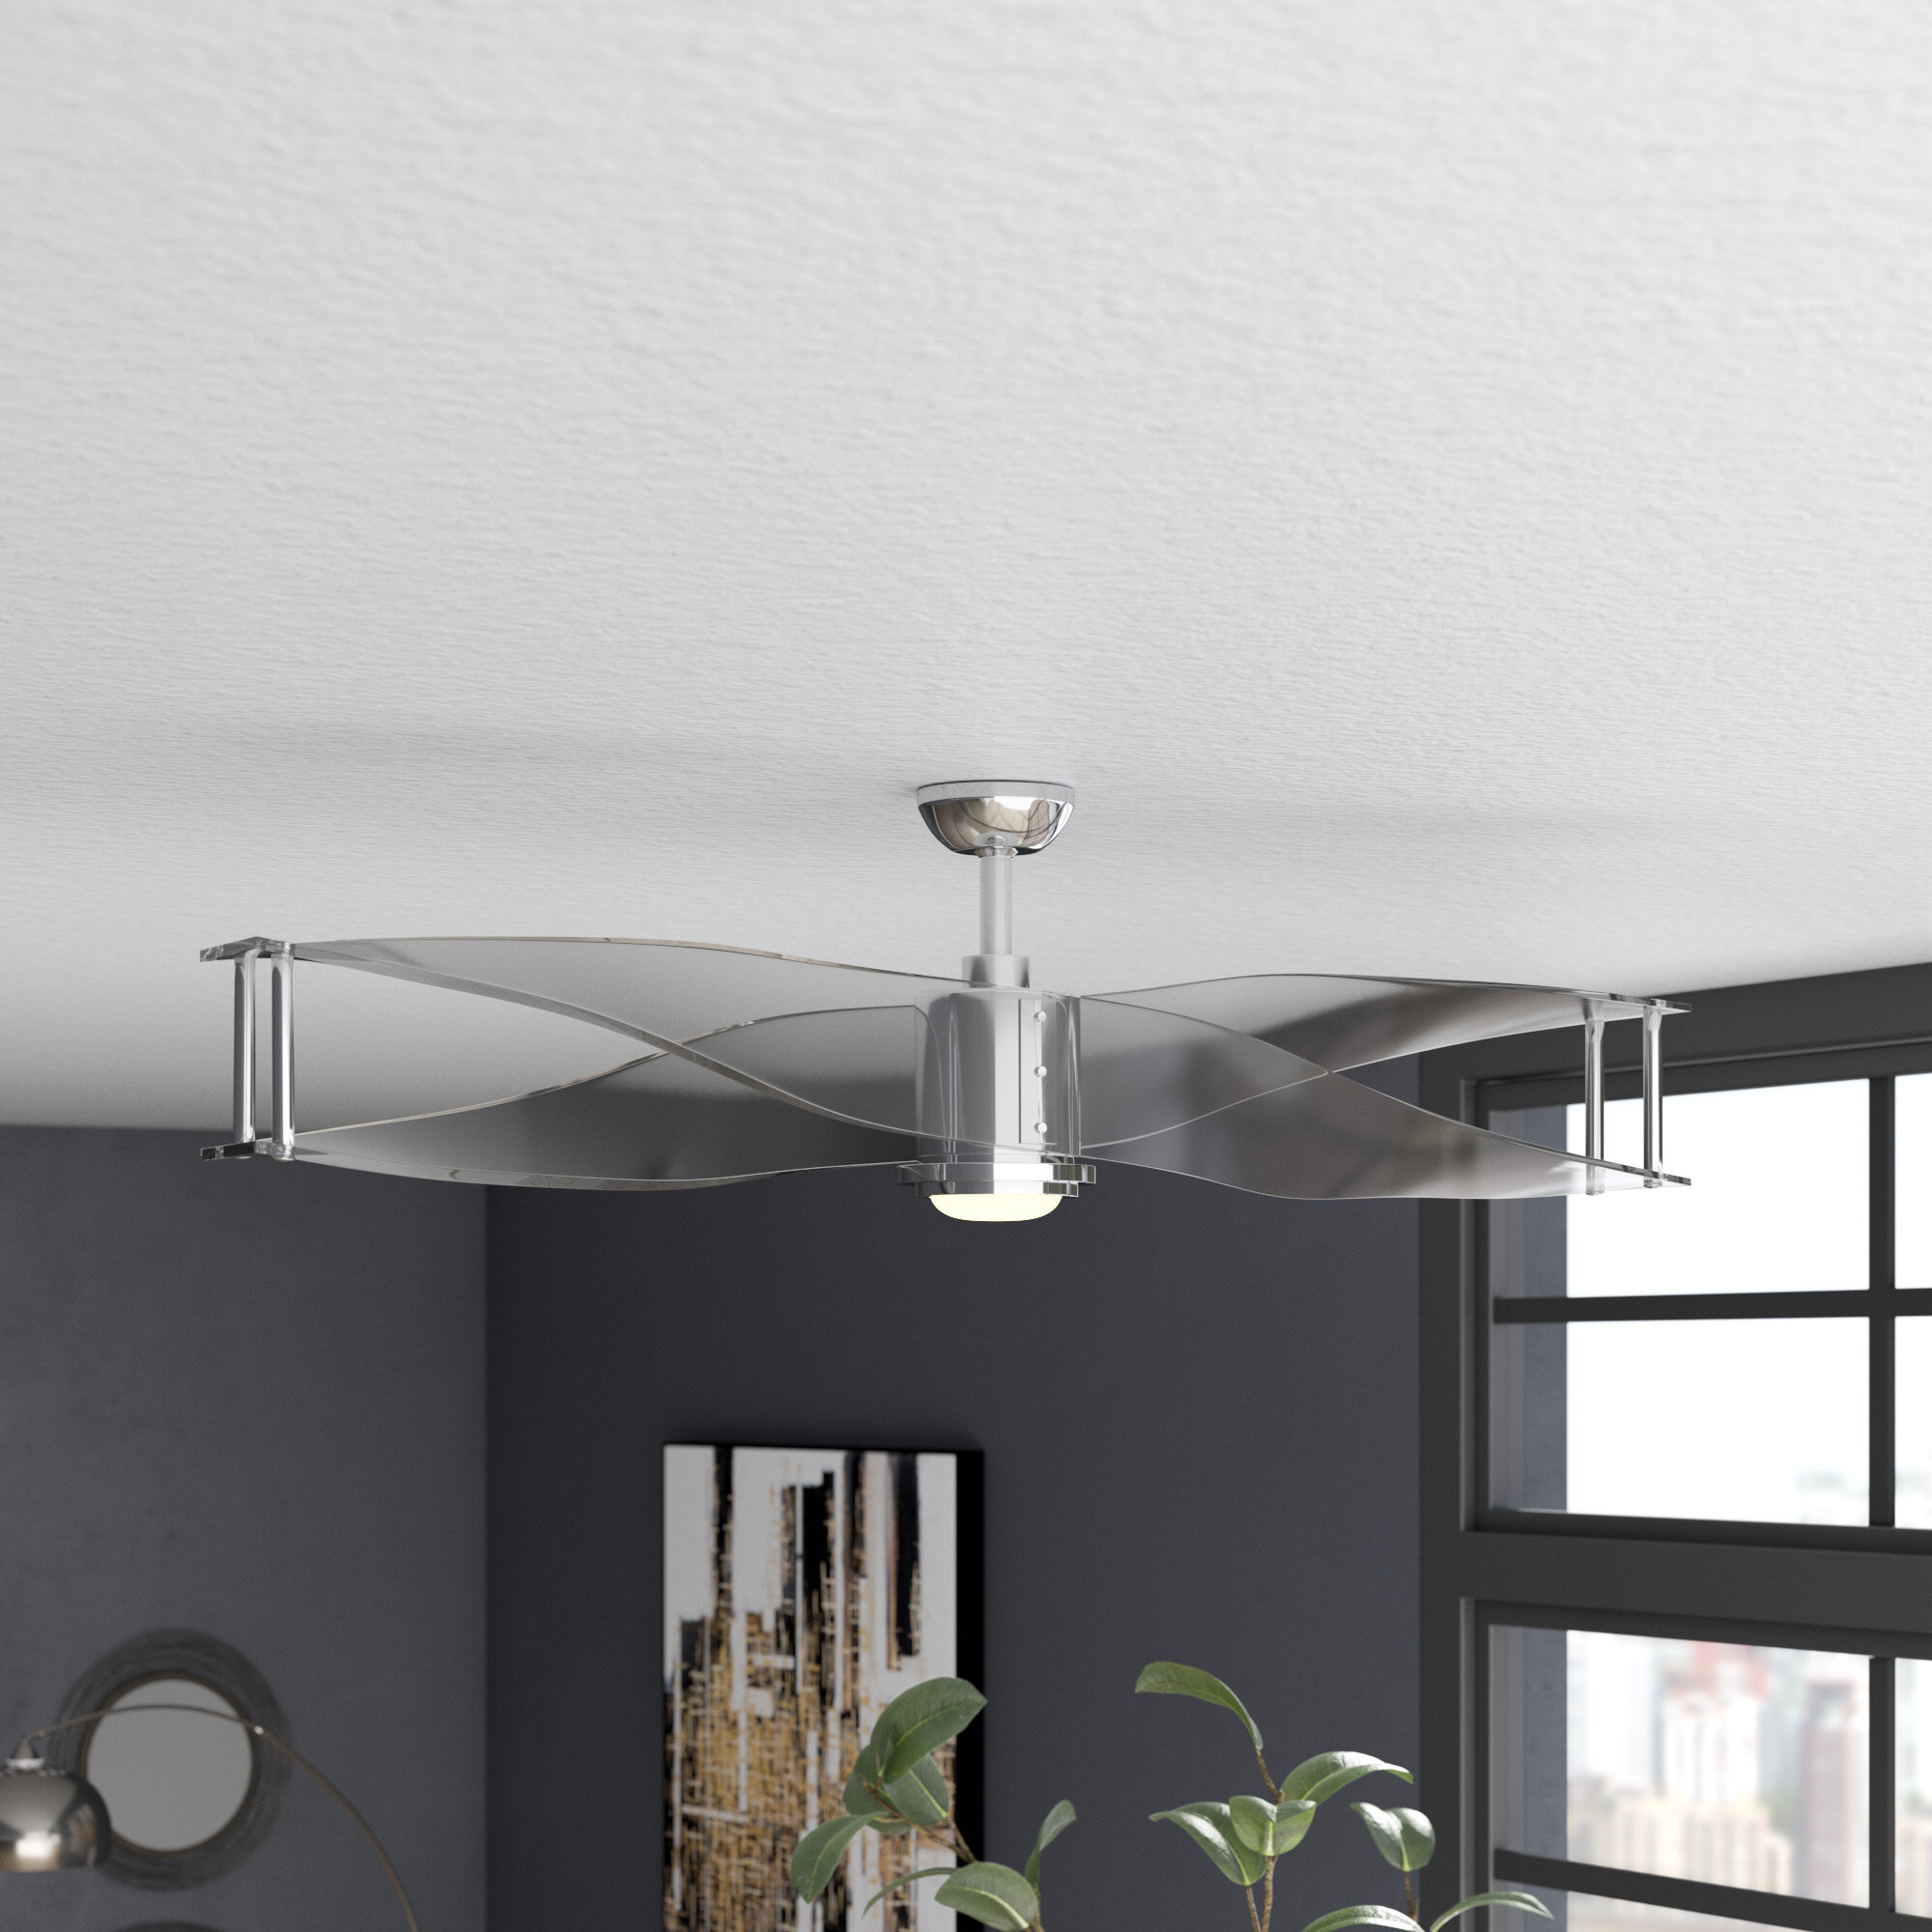 Modern Contemporary Ceiling Fans You Ll Love In 2020 Wayfair,Japanese Cherry Blossom Festival Dc